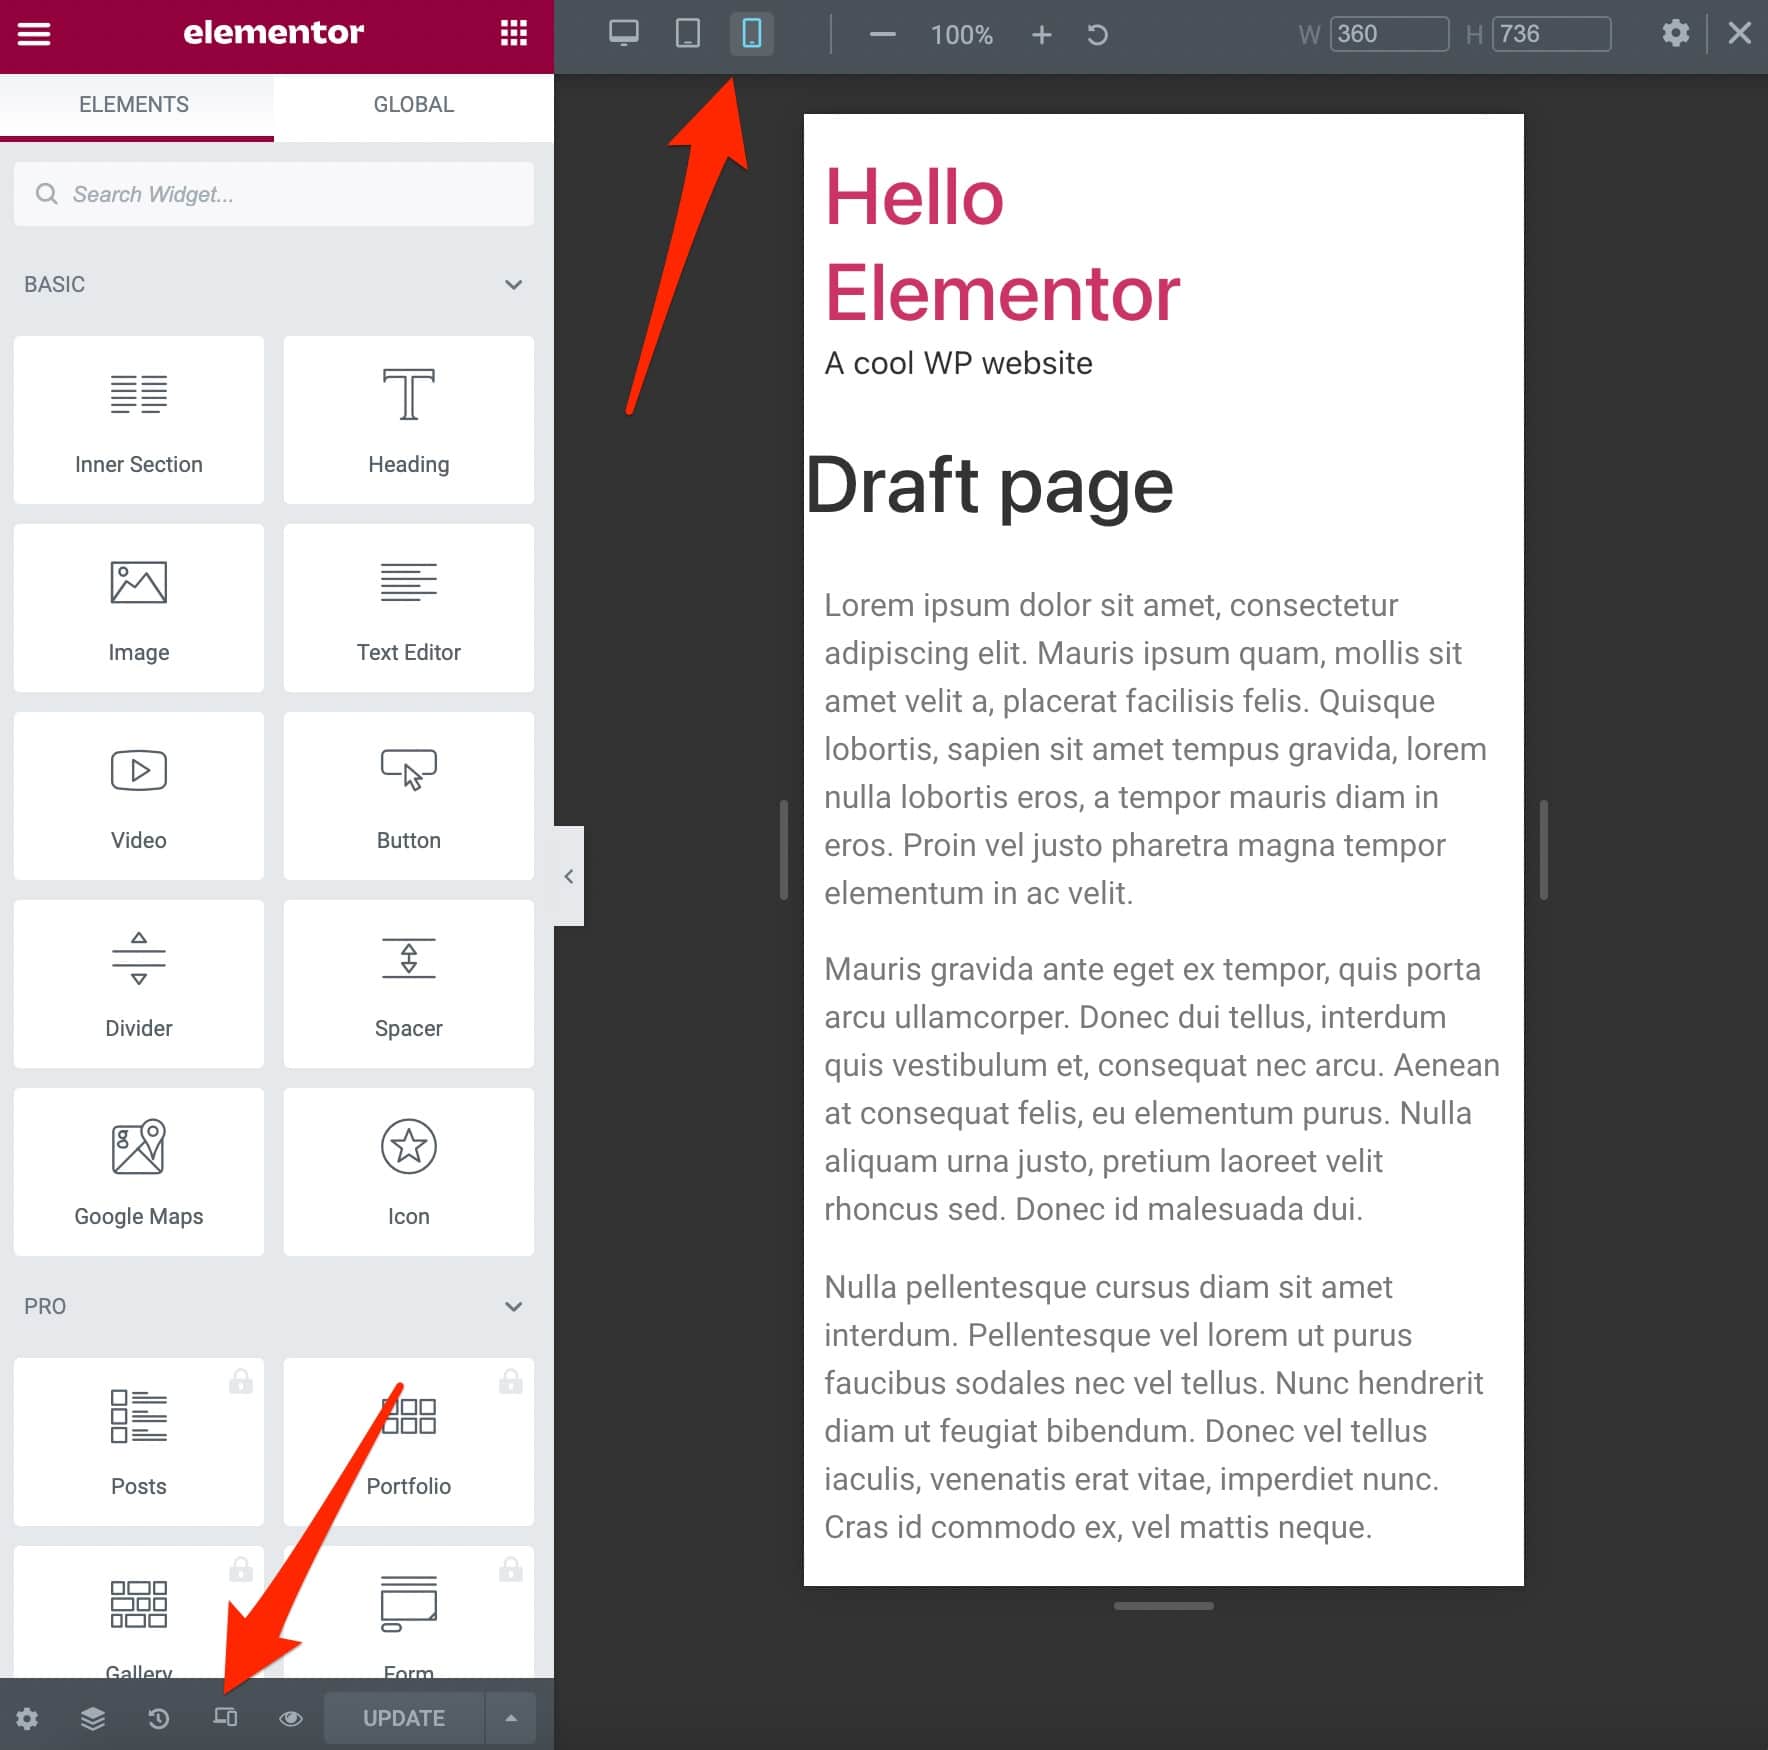 Responsive test of the Hello Elementor theme from the Elementor interface.